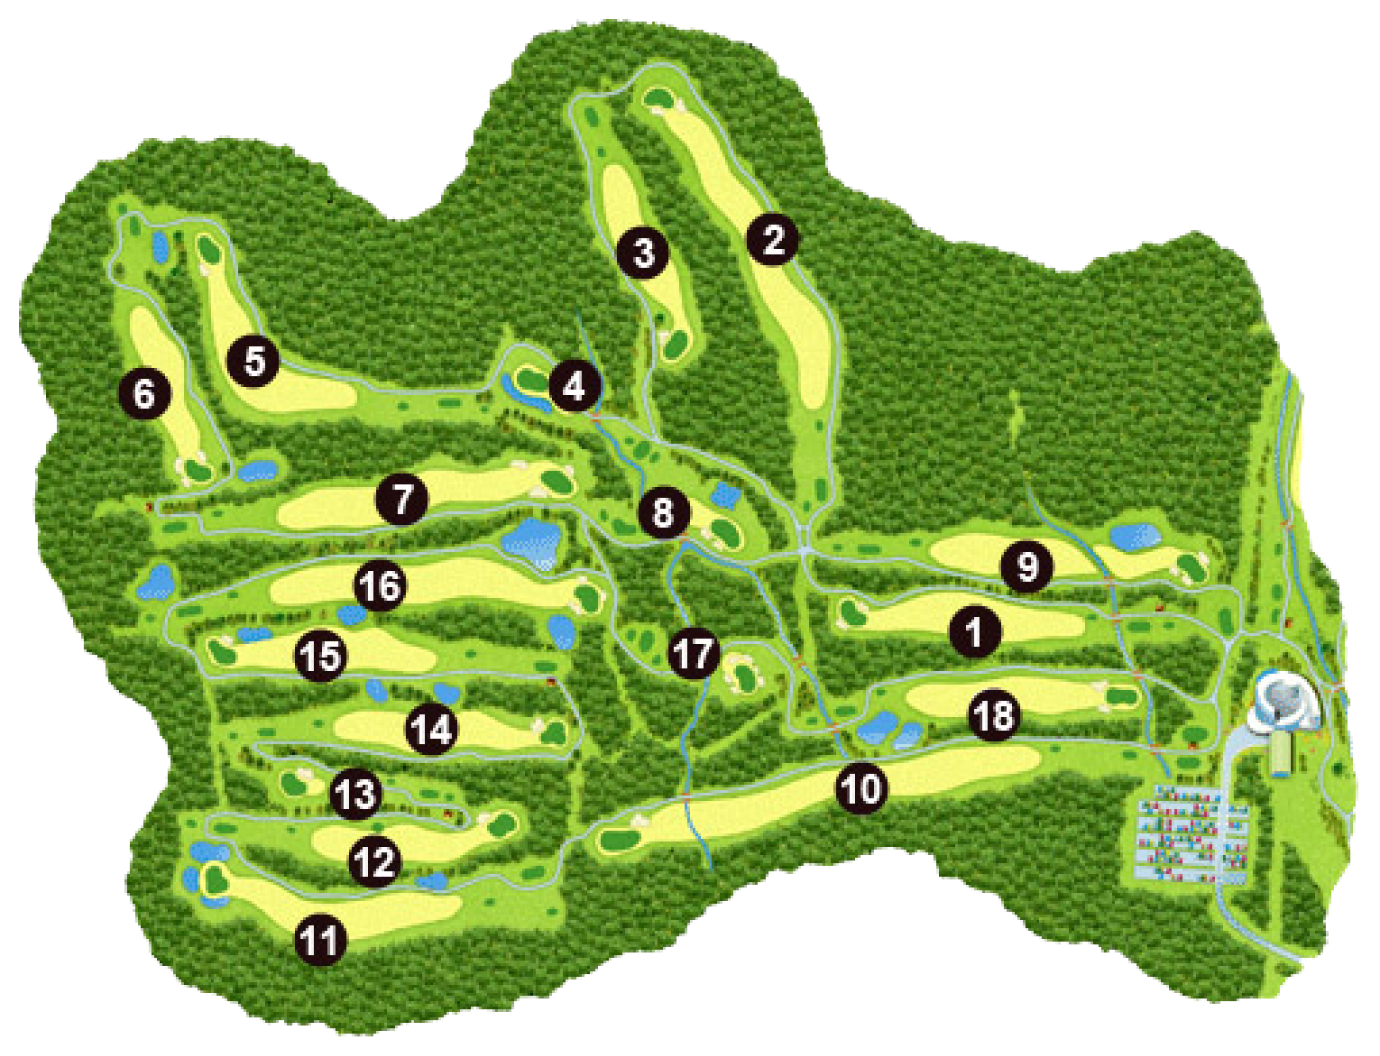 Course map